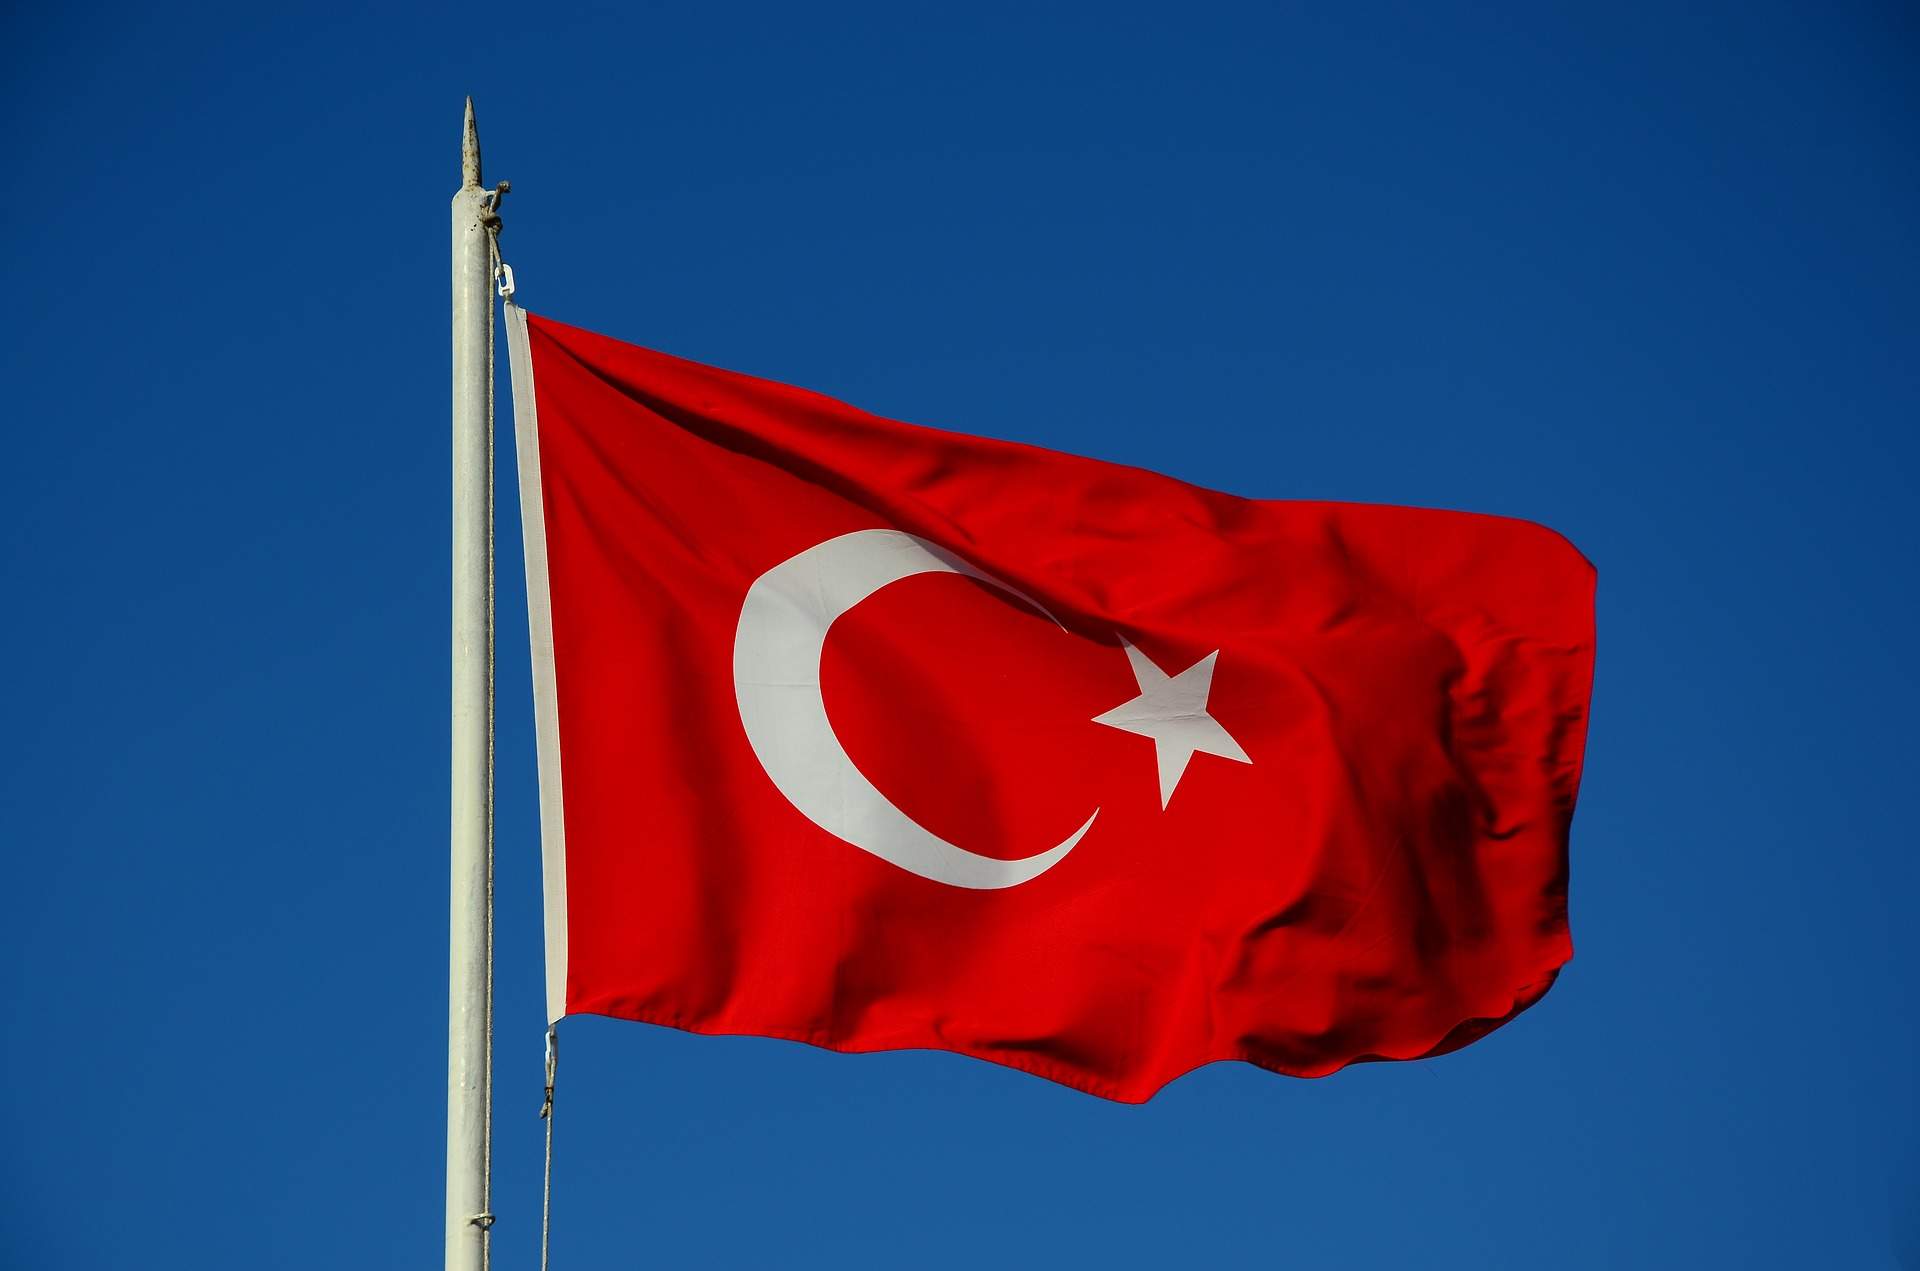 Turkey: an industry in search of stability